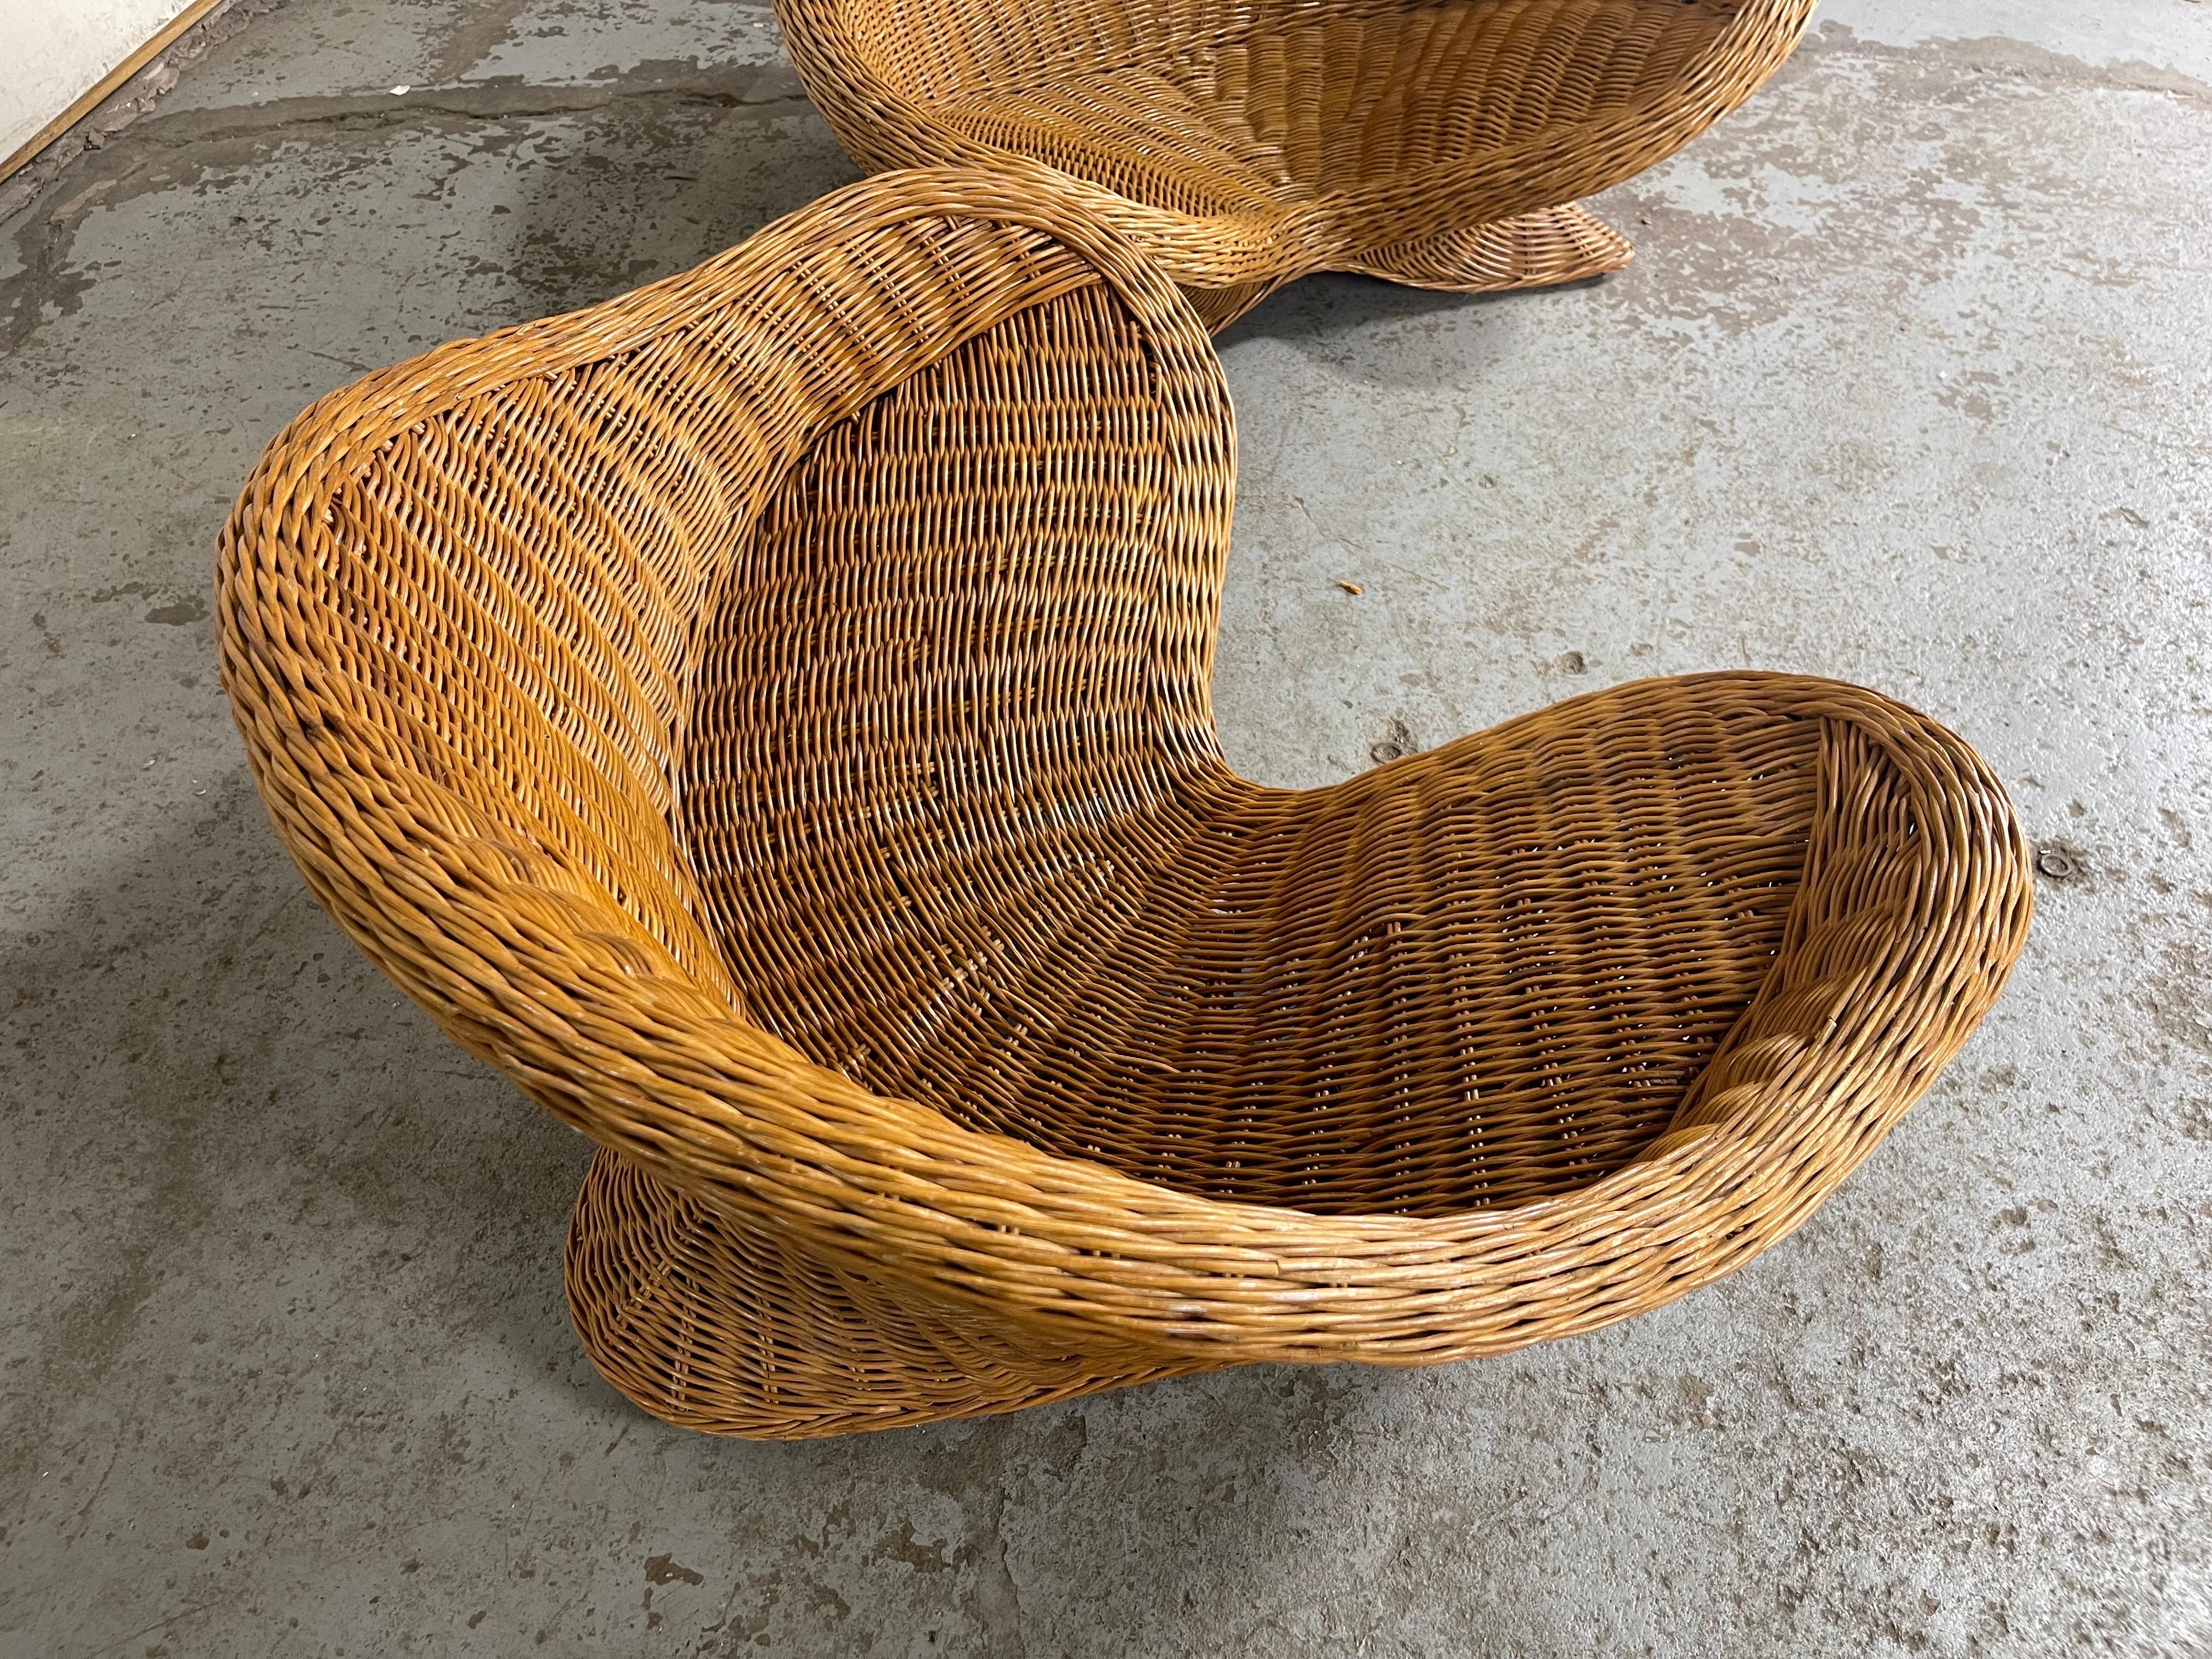 Wicker Mid Century Modern Petite Rattan Lotus Chairs by Vivai del Sud, Italy